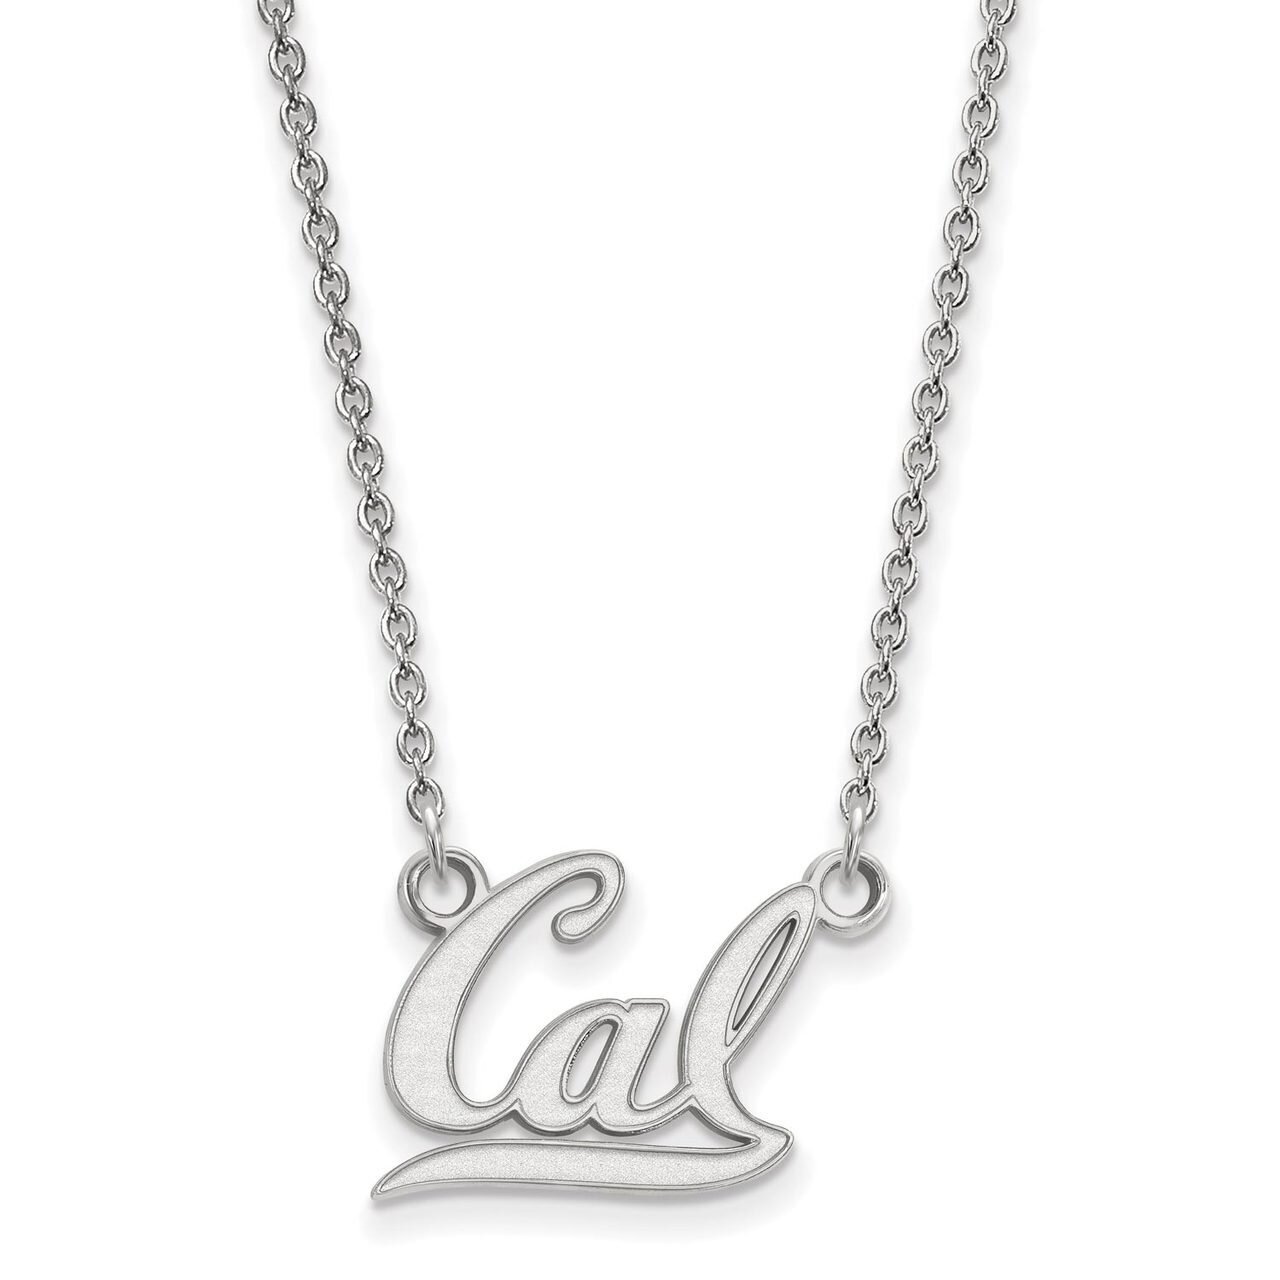 University of California Berkeley Small Pendant with Necklace Sterling Silver SS011UCB-18